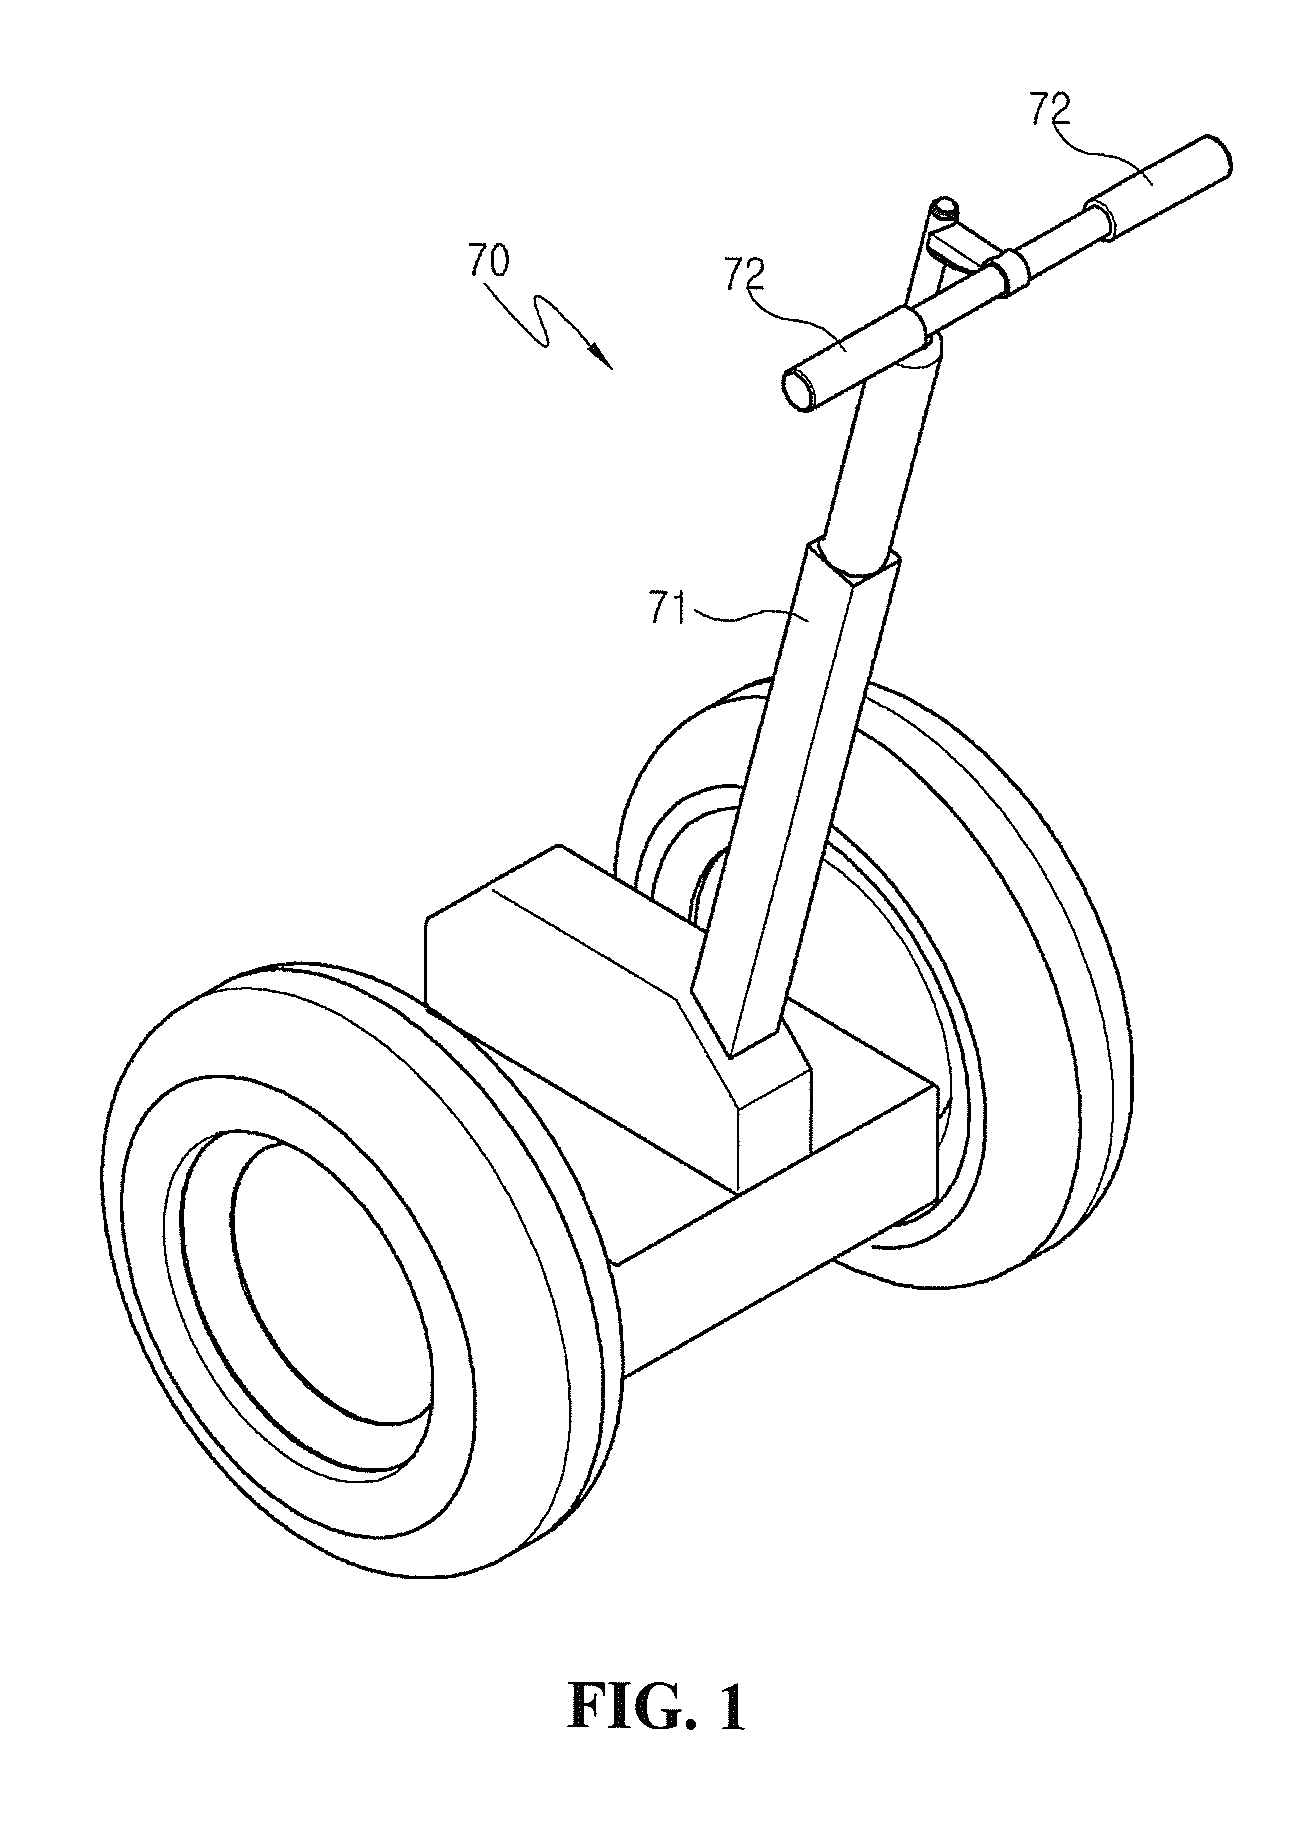 Hands-free electric scooter